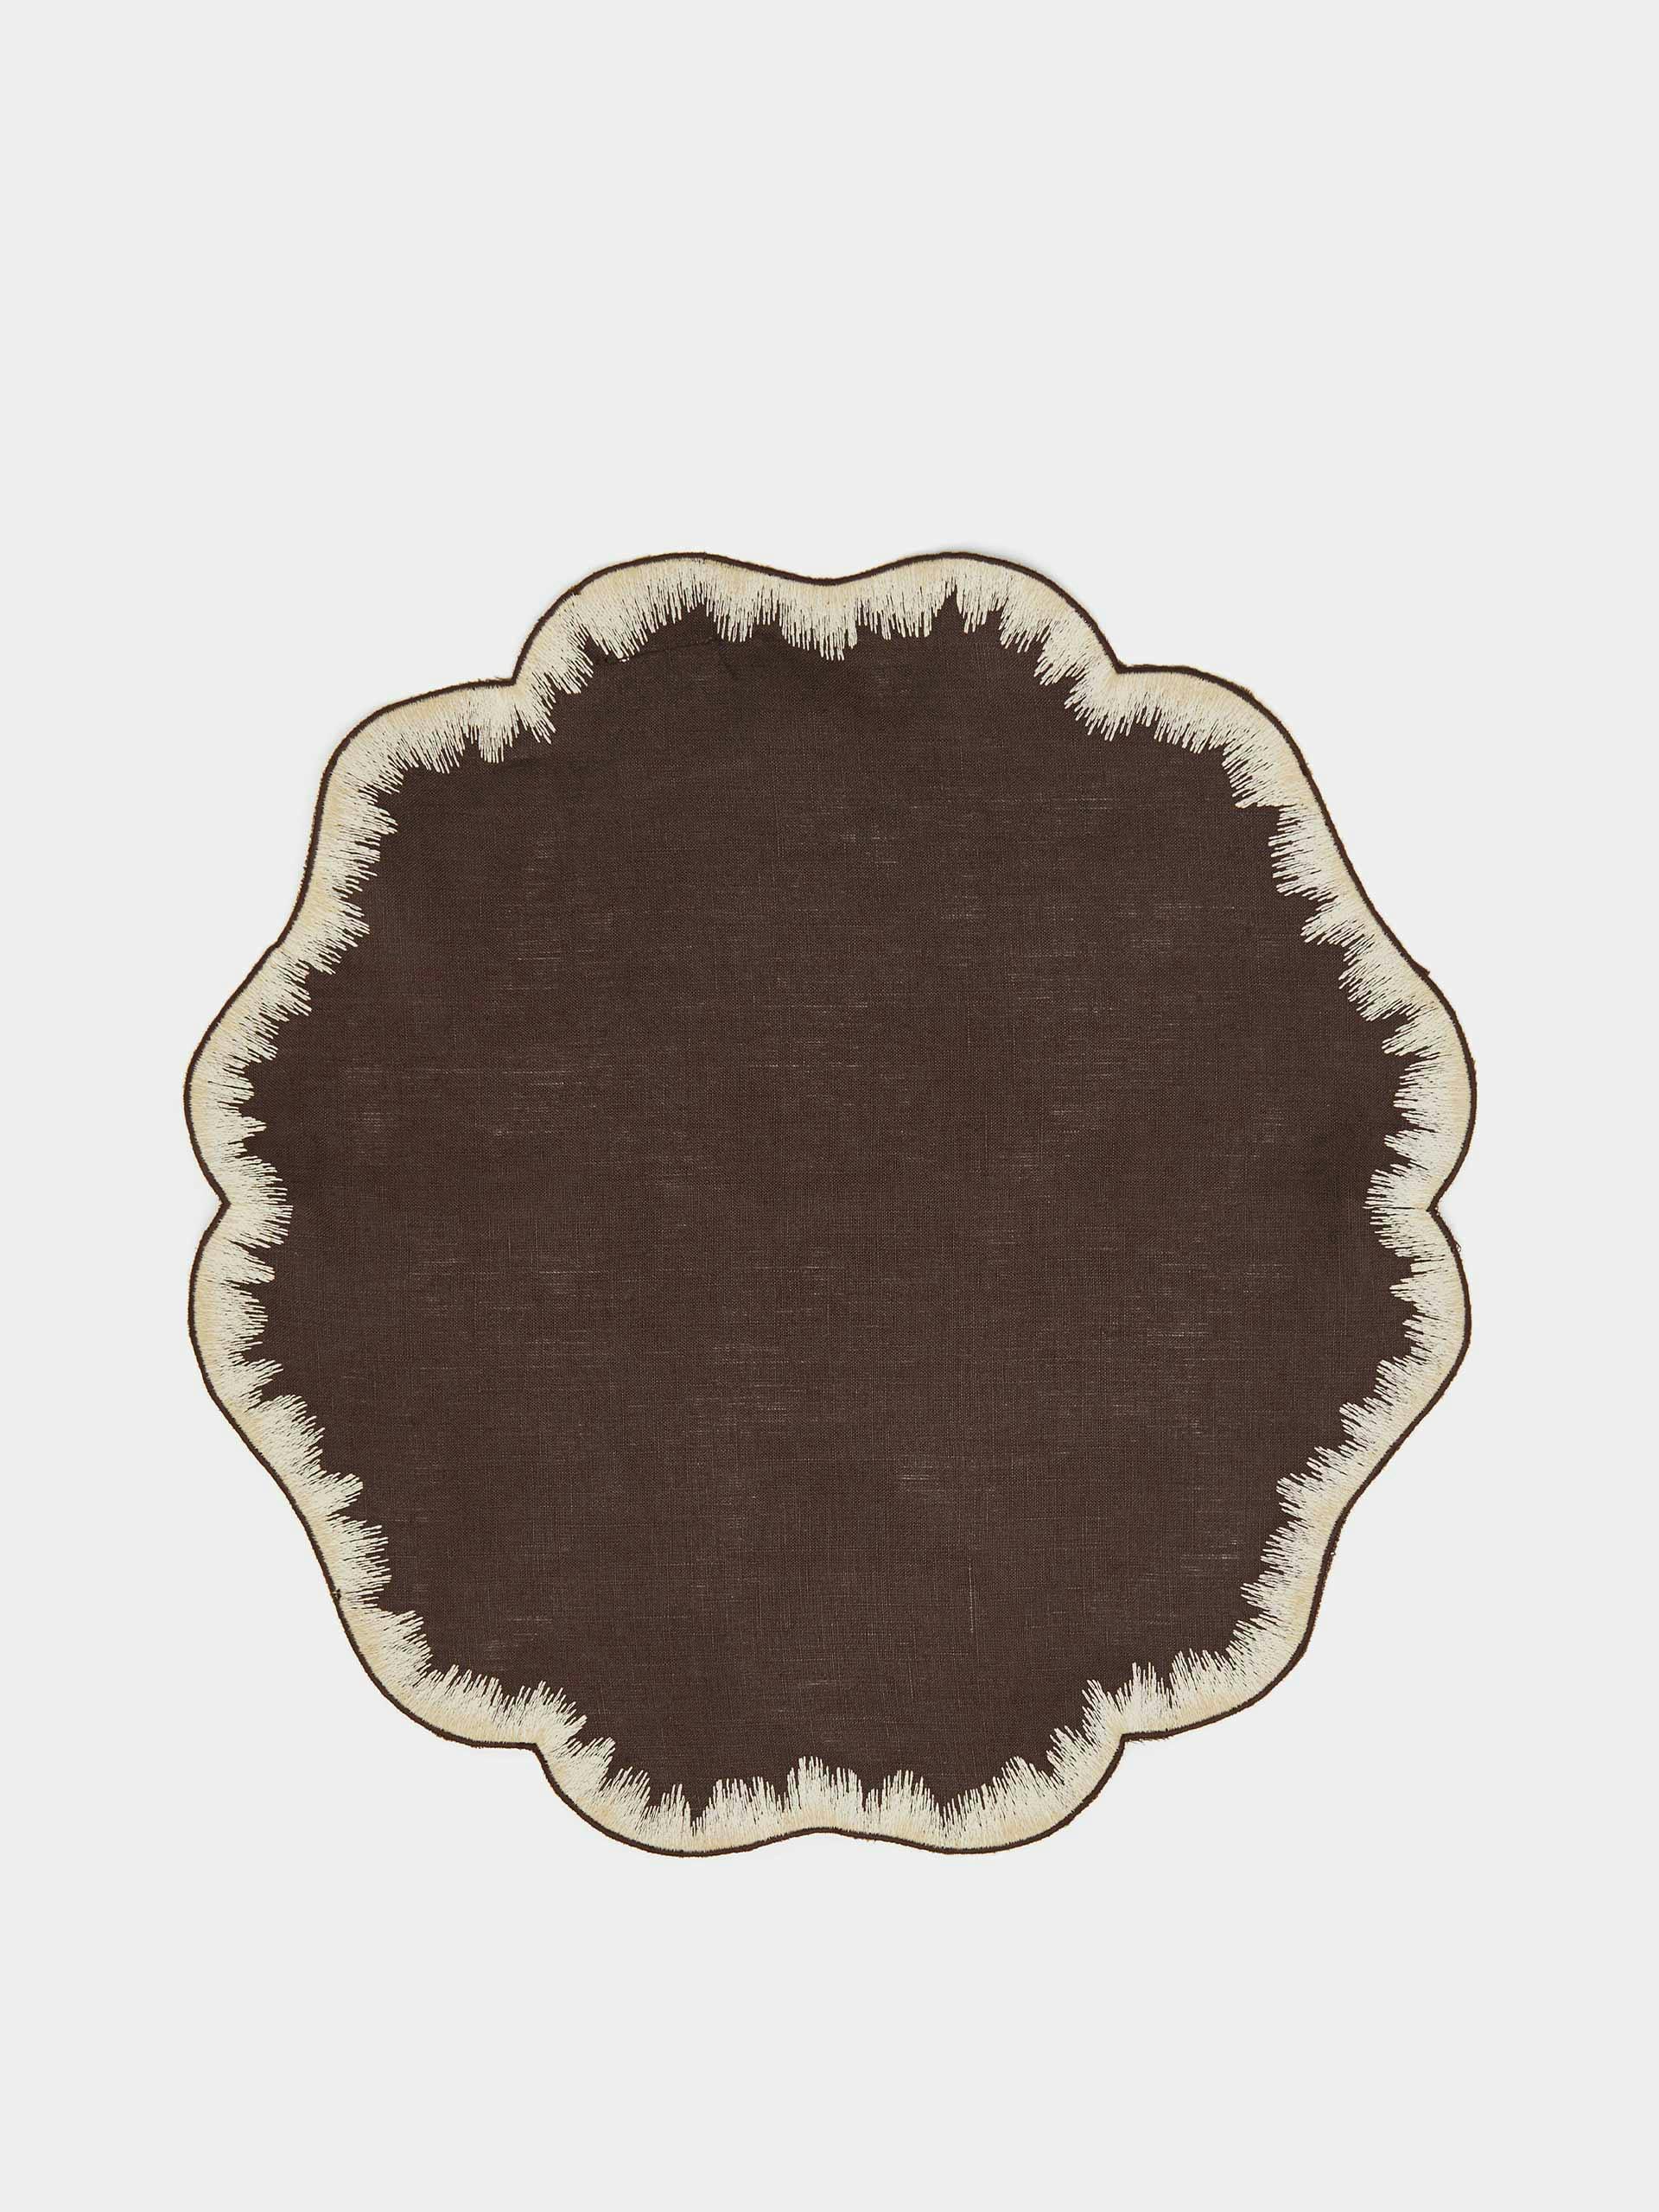 Embroidered linen brown placemats (set of 4)